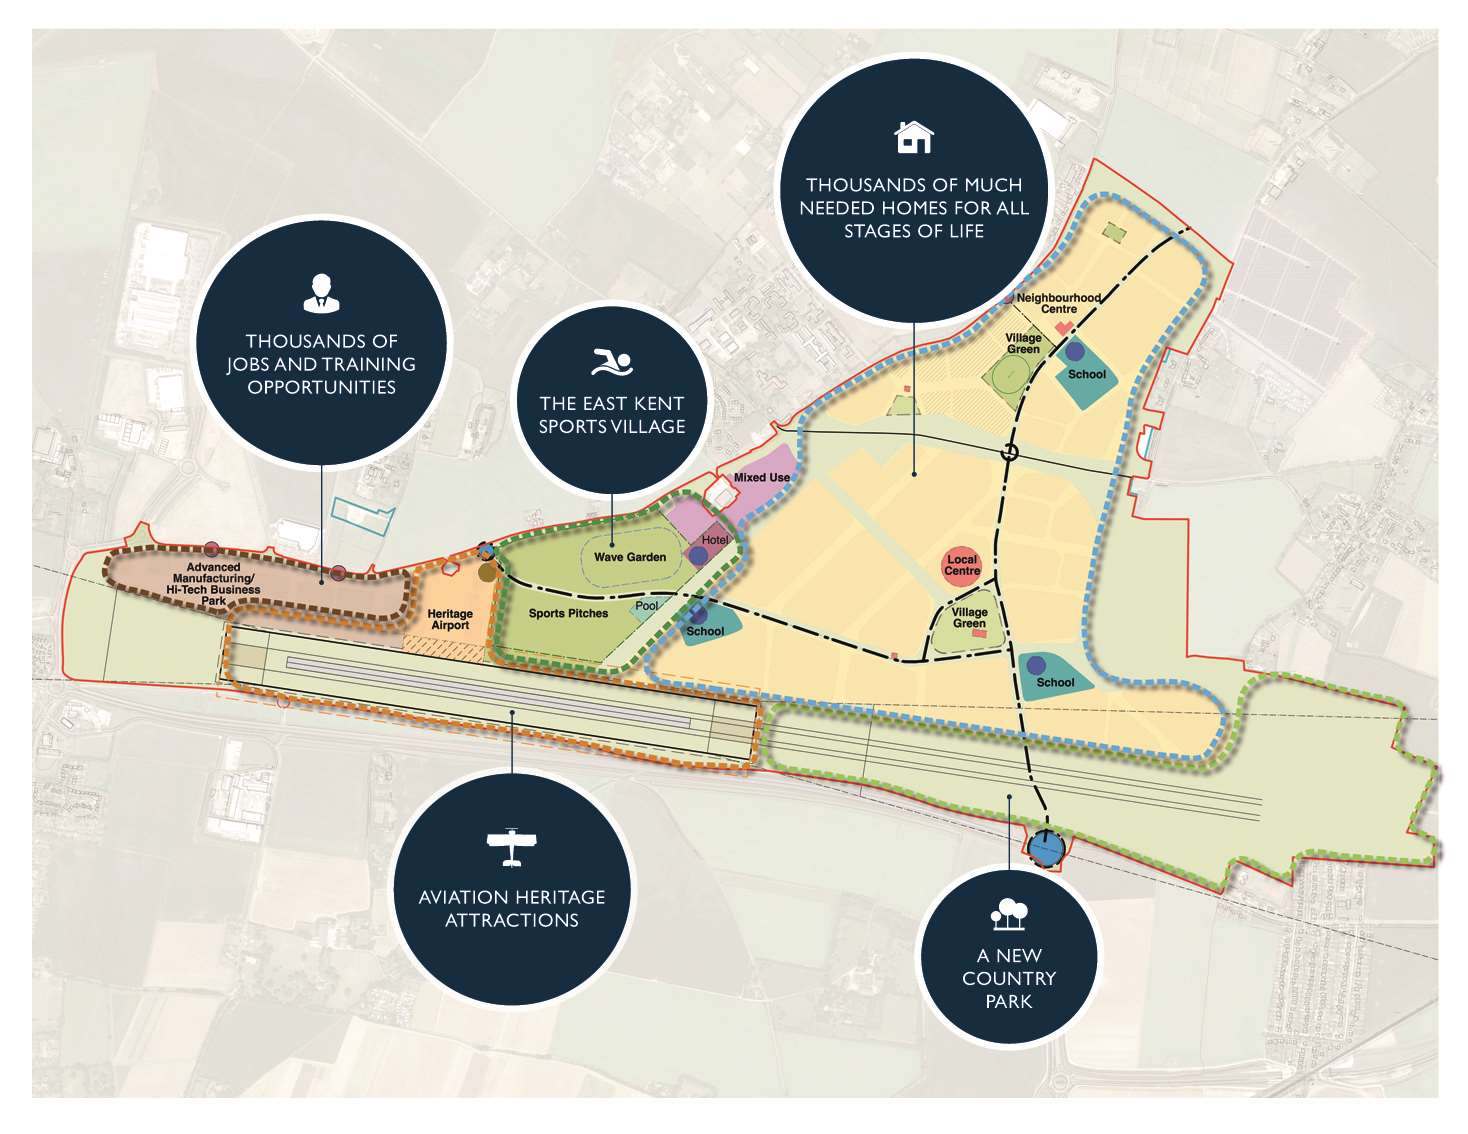 The latest masterplan for the former Manston airport site, known as Stone Hill Park, including part of the runway being kept for vintage aviation